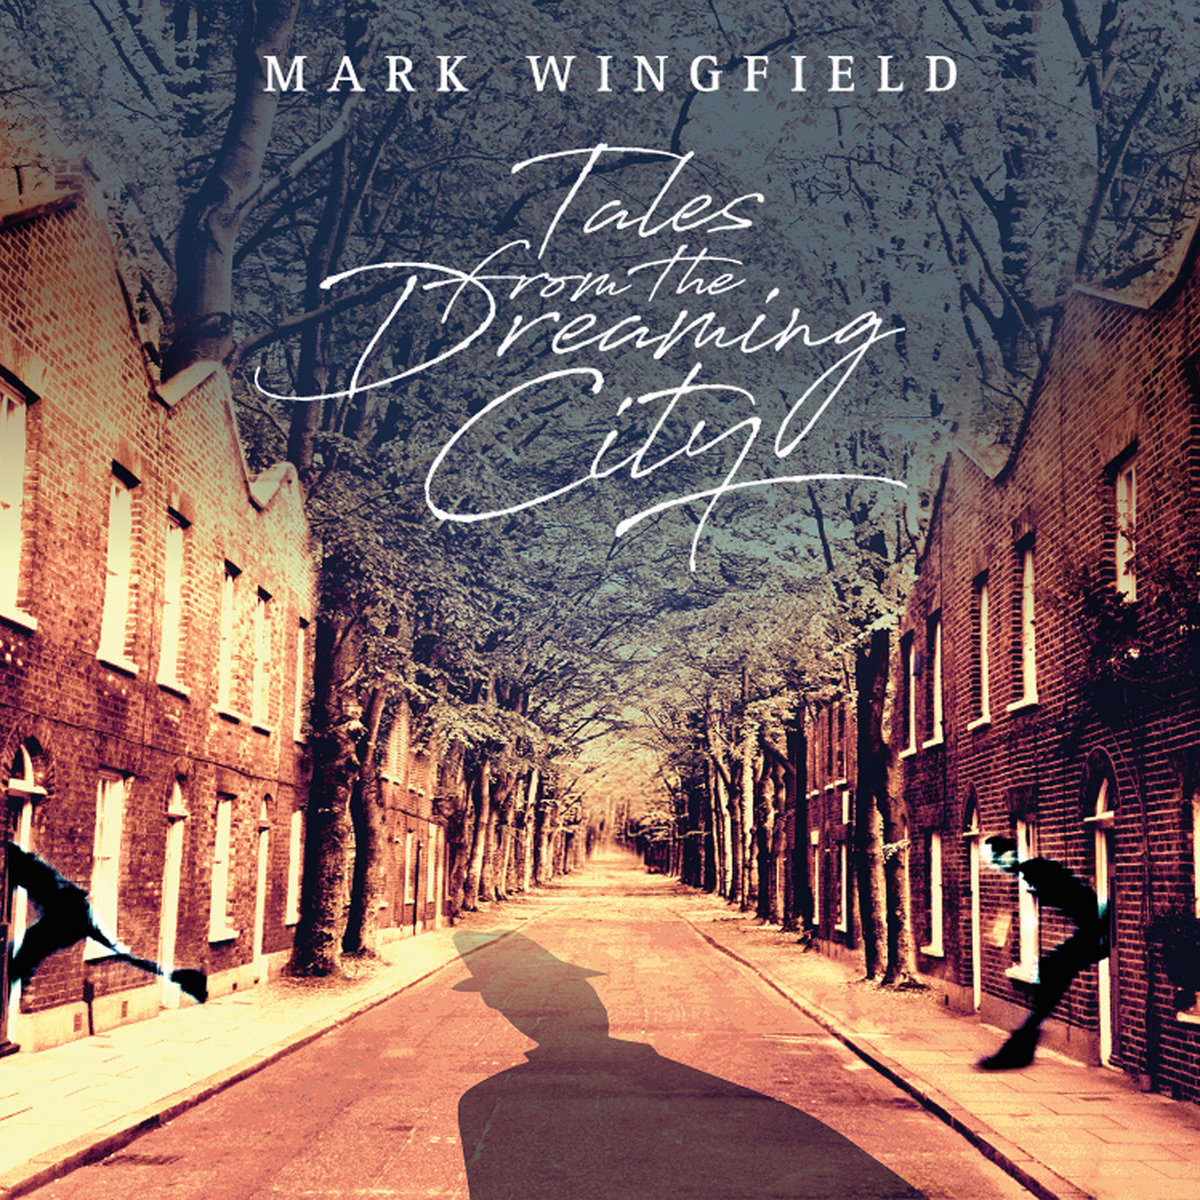 Mark Wingfield - Tales From The Dreaming City (2018) [FLAC 24bit/88,2kHz]